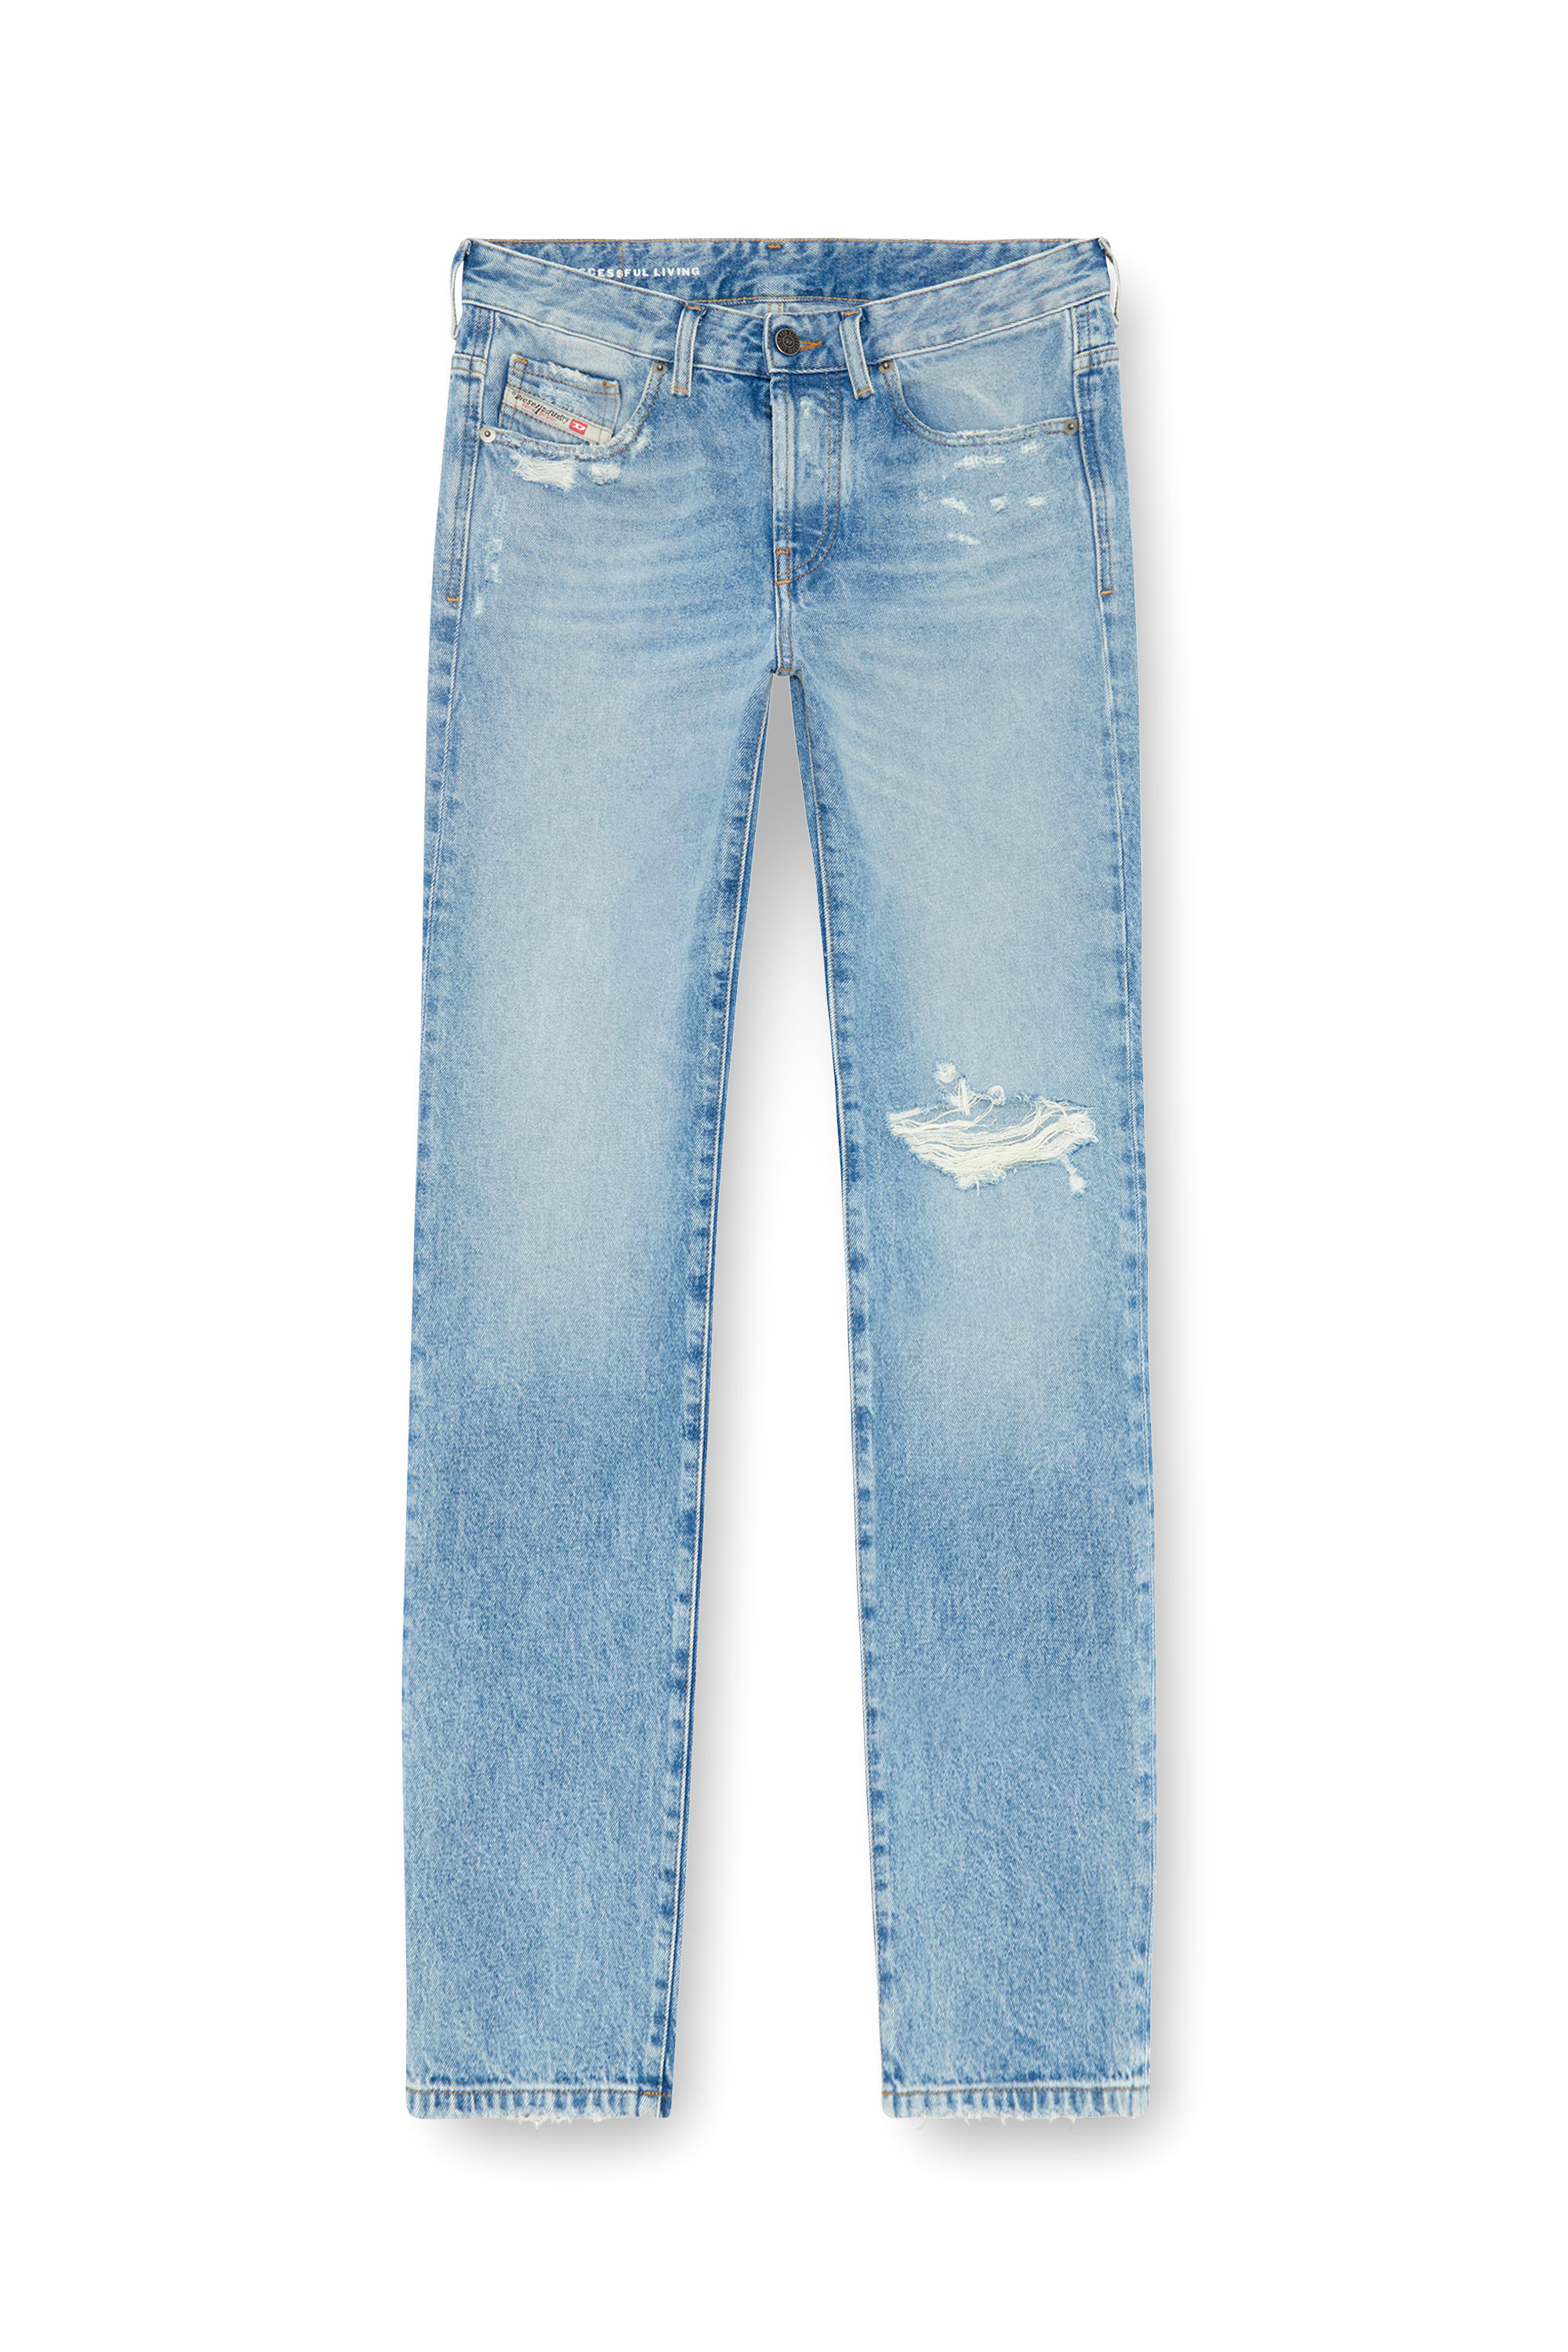 Diesel - Straight Jeans 1989 D-Mine 09J80, Mujer Straight Jeans - 1989 D-Mine in Azul marino - Image 3